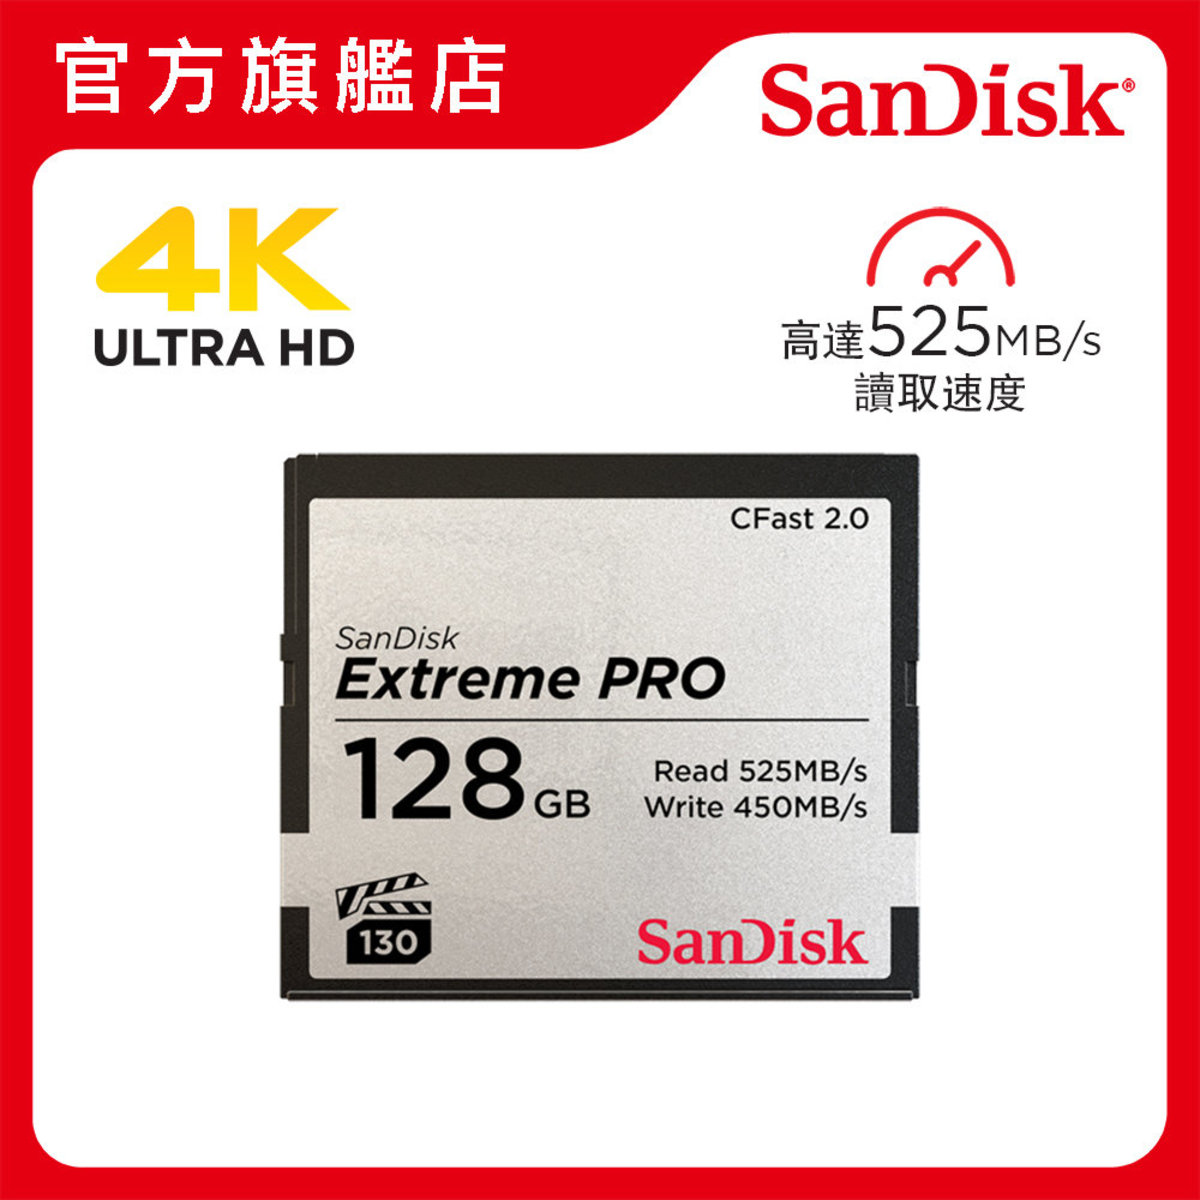 Extreme PRO CFast 2.0 128GB Memory Card (SDCFSP-128G-G46D)